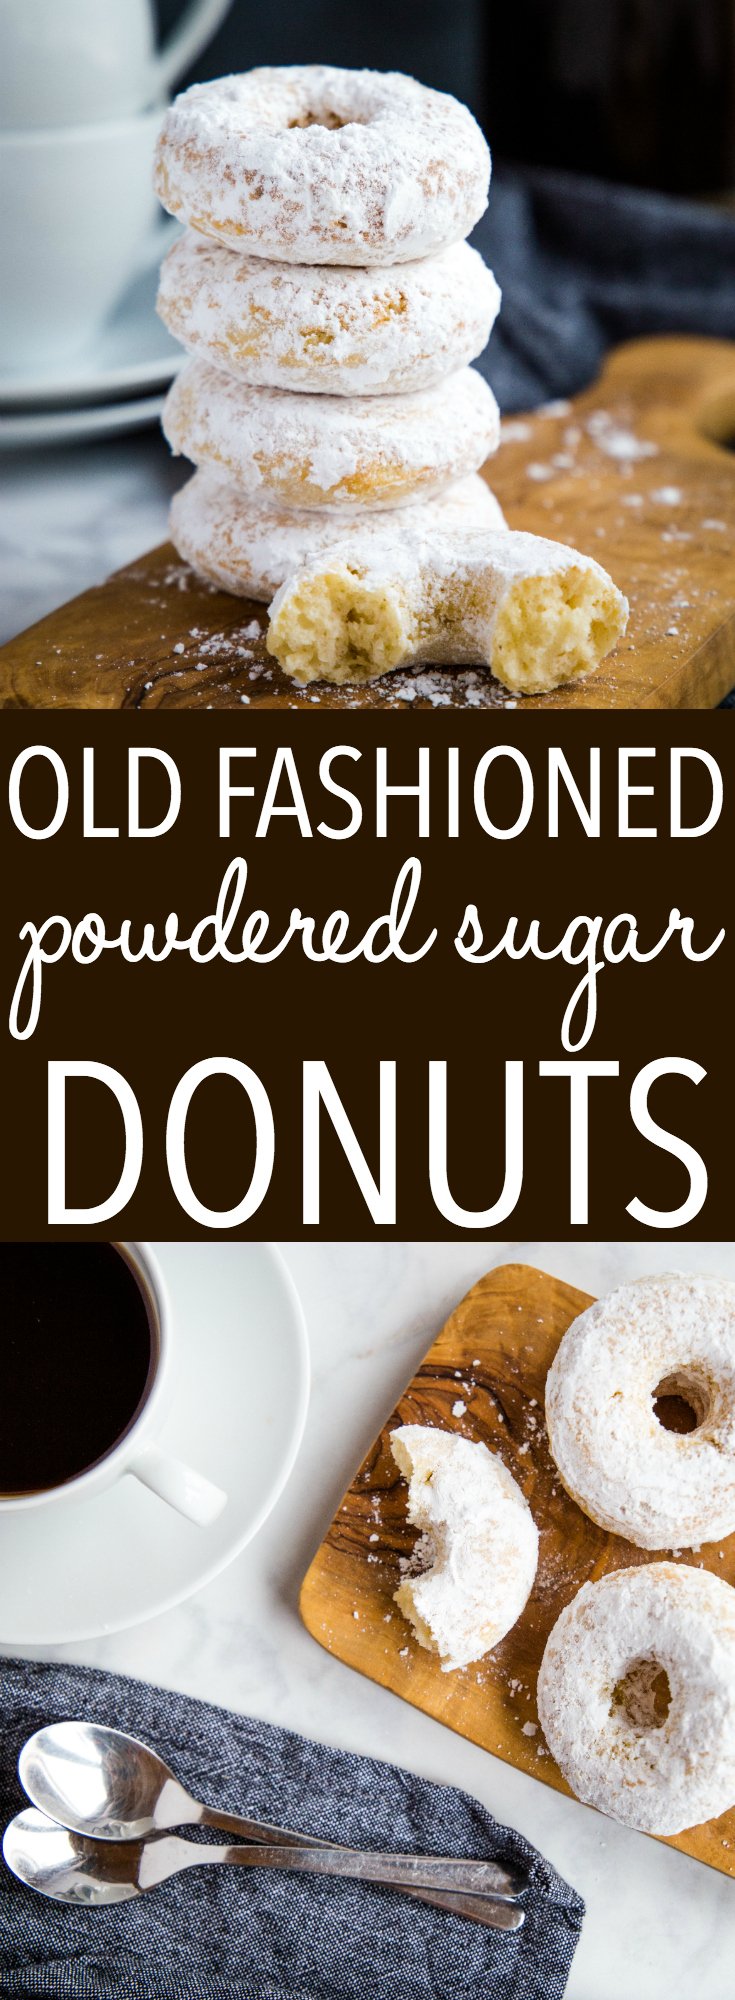 These Old Fashioned Powdered Sugar Donuts are a delicious treat that's easy to make and much lower in fat than coffee shop donuts! Under 100 calories each! Recipe from thebusybaker.ca! #donuts #baked #notfried #treat #sweet #lowfat #healthy #easytomake #dessert #baking #muffins #doughnuts via @busybakerblog